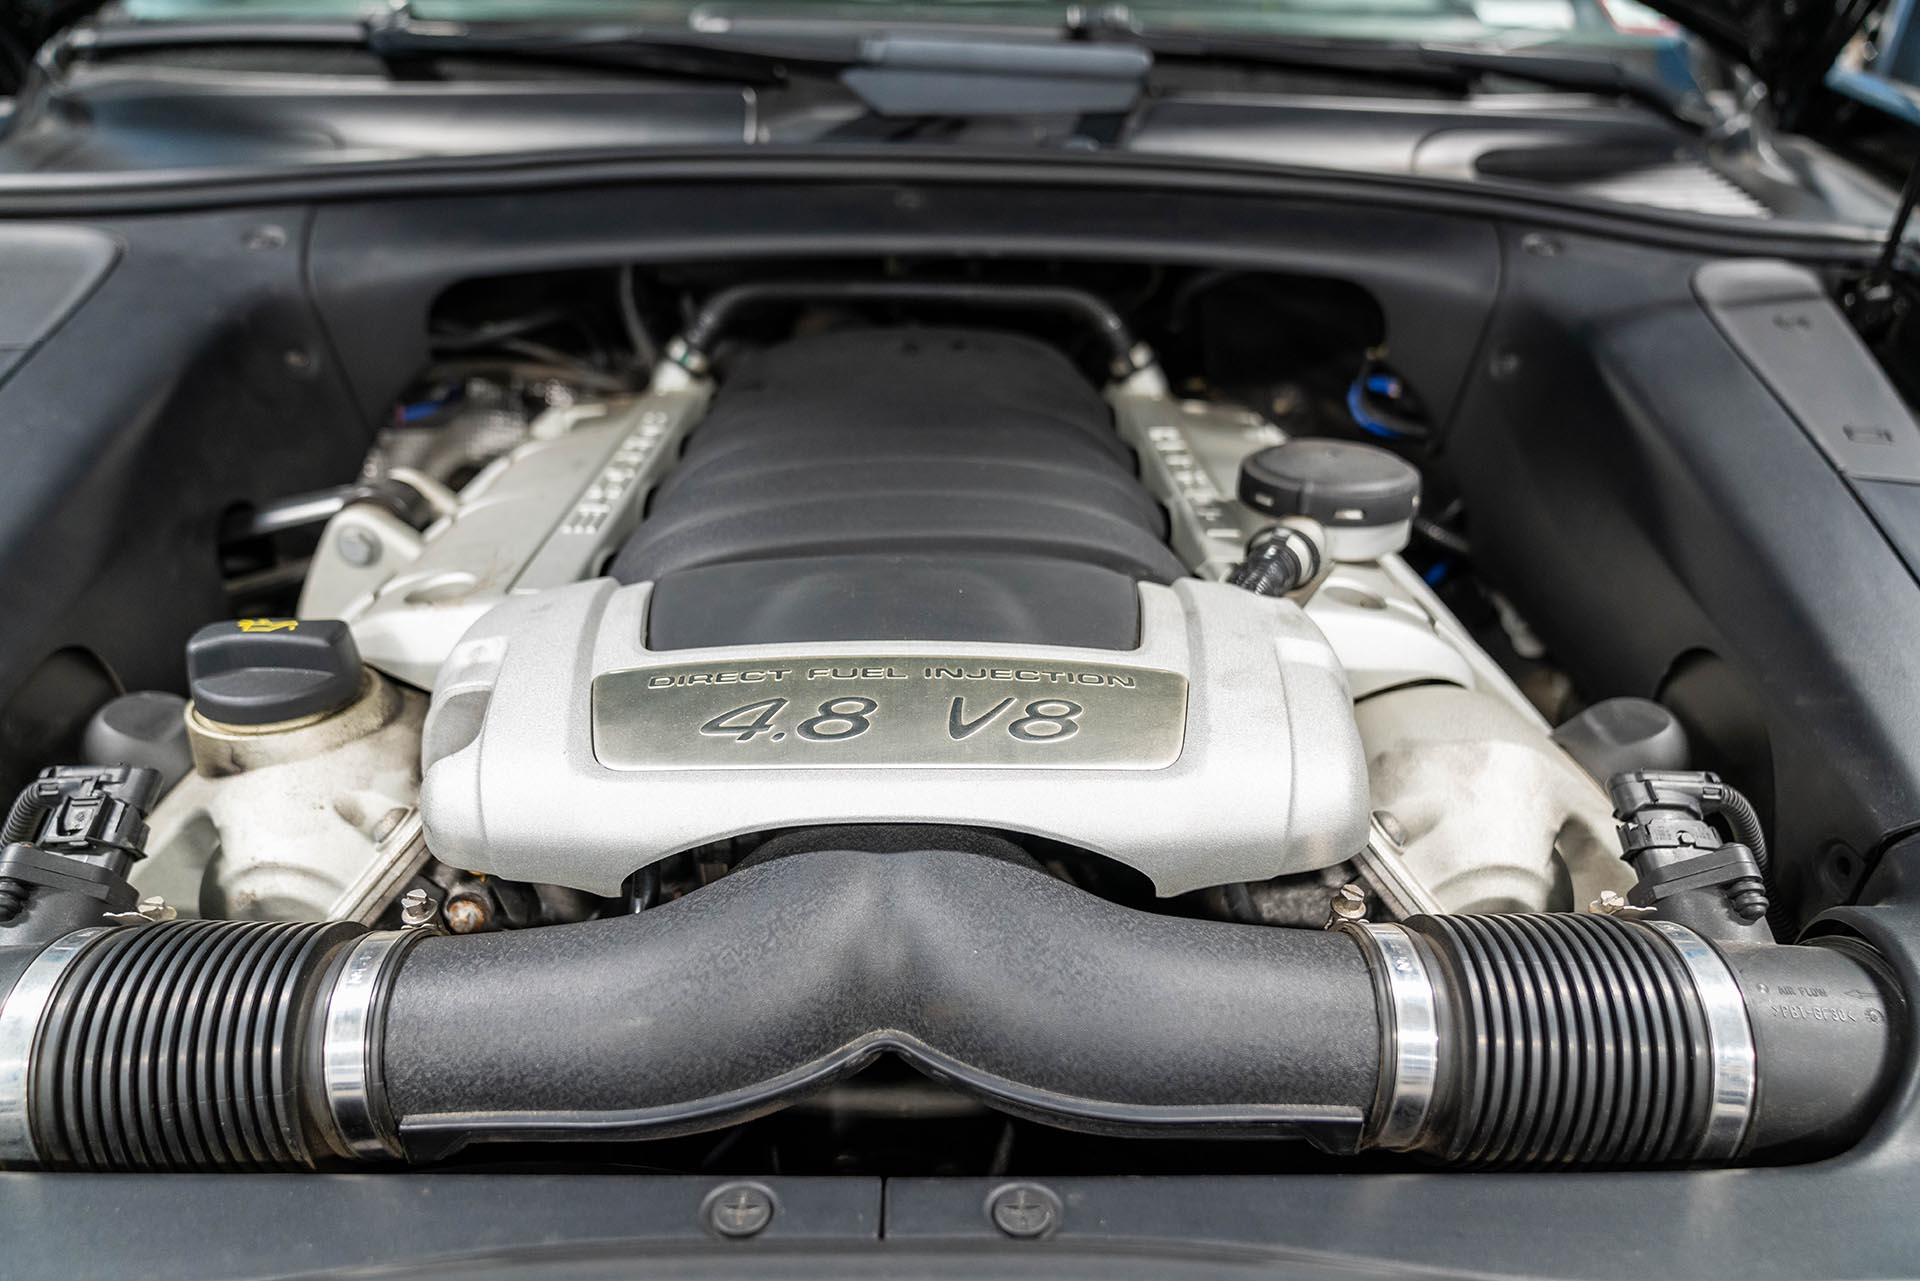 The Definitive Guide To First-Generation Porsche Cayenne Engine